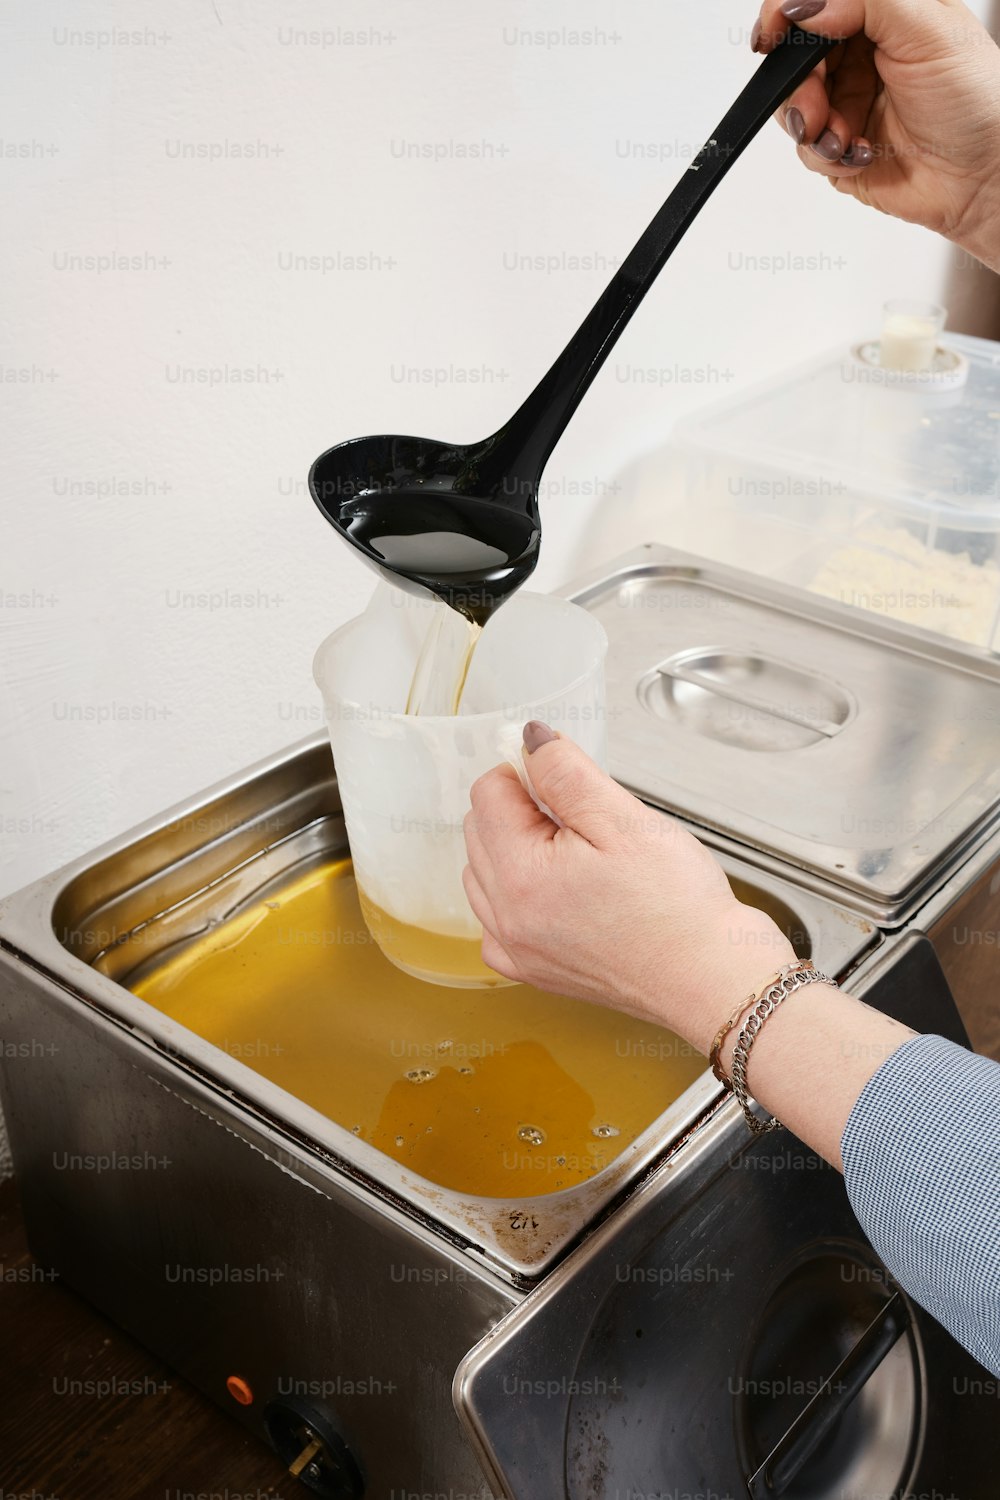 a person pouring liquid into a container with a spoon